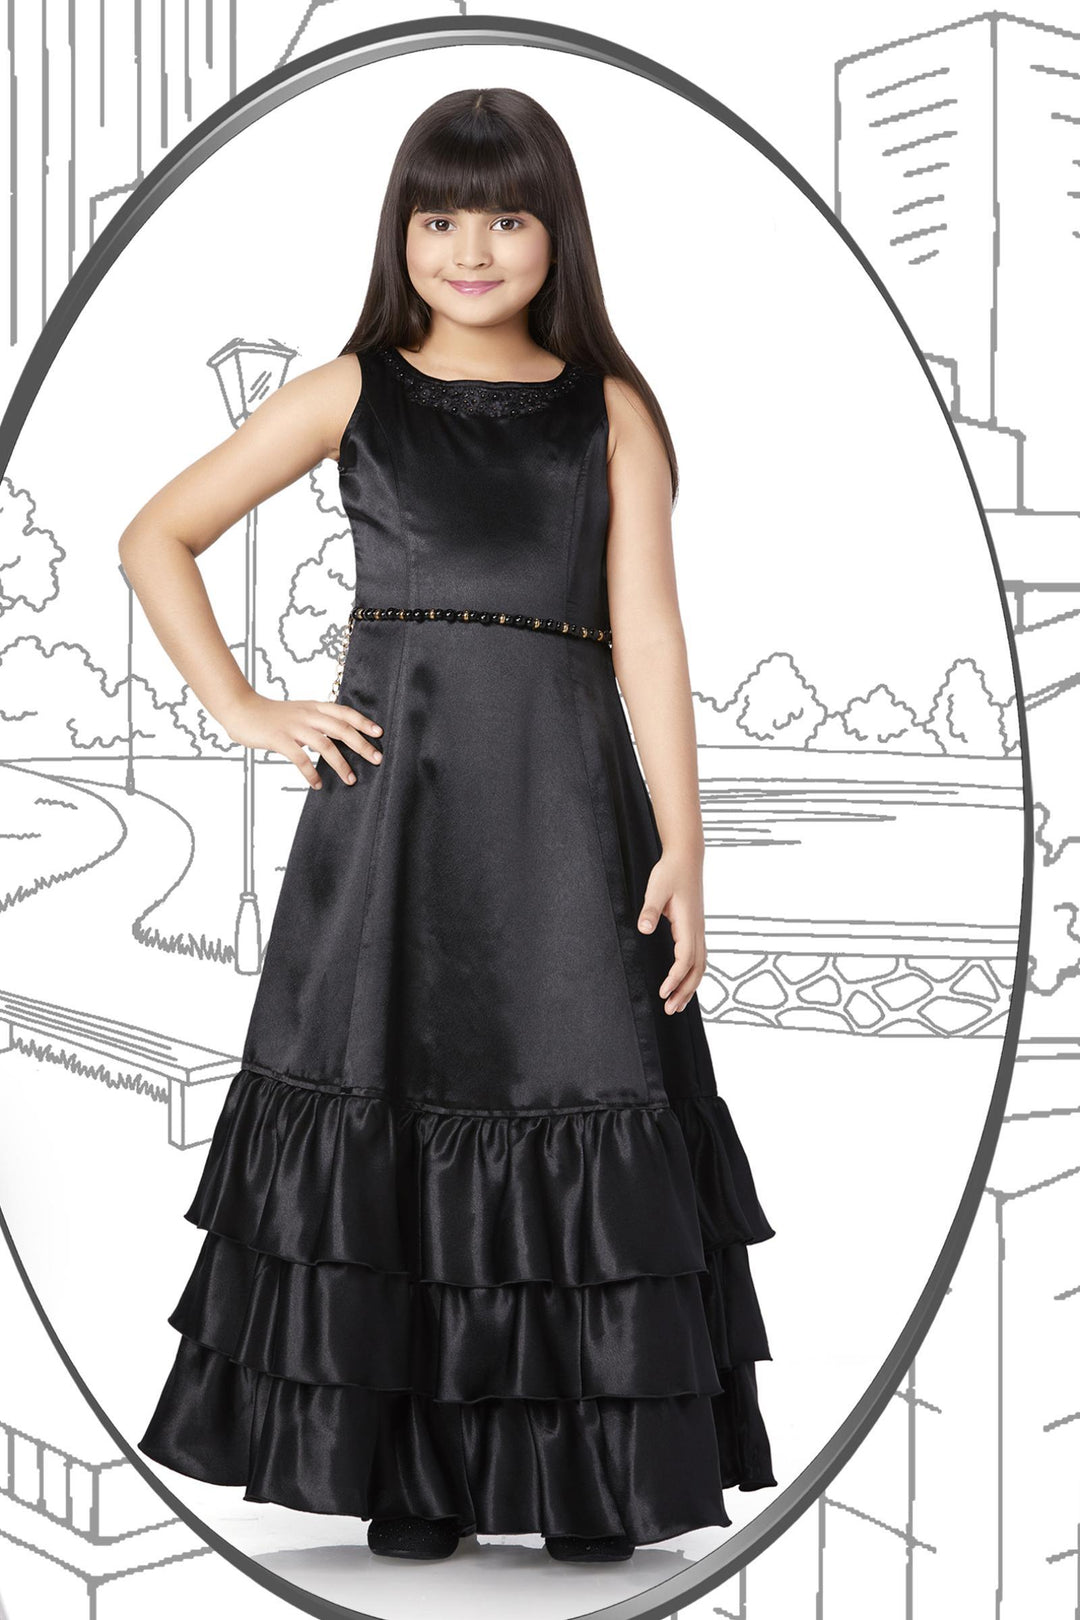 Black with Silver Foil Print Overcoat Styled Long Gown For Girls - SeasonsChennai